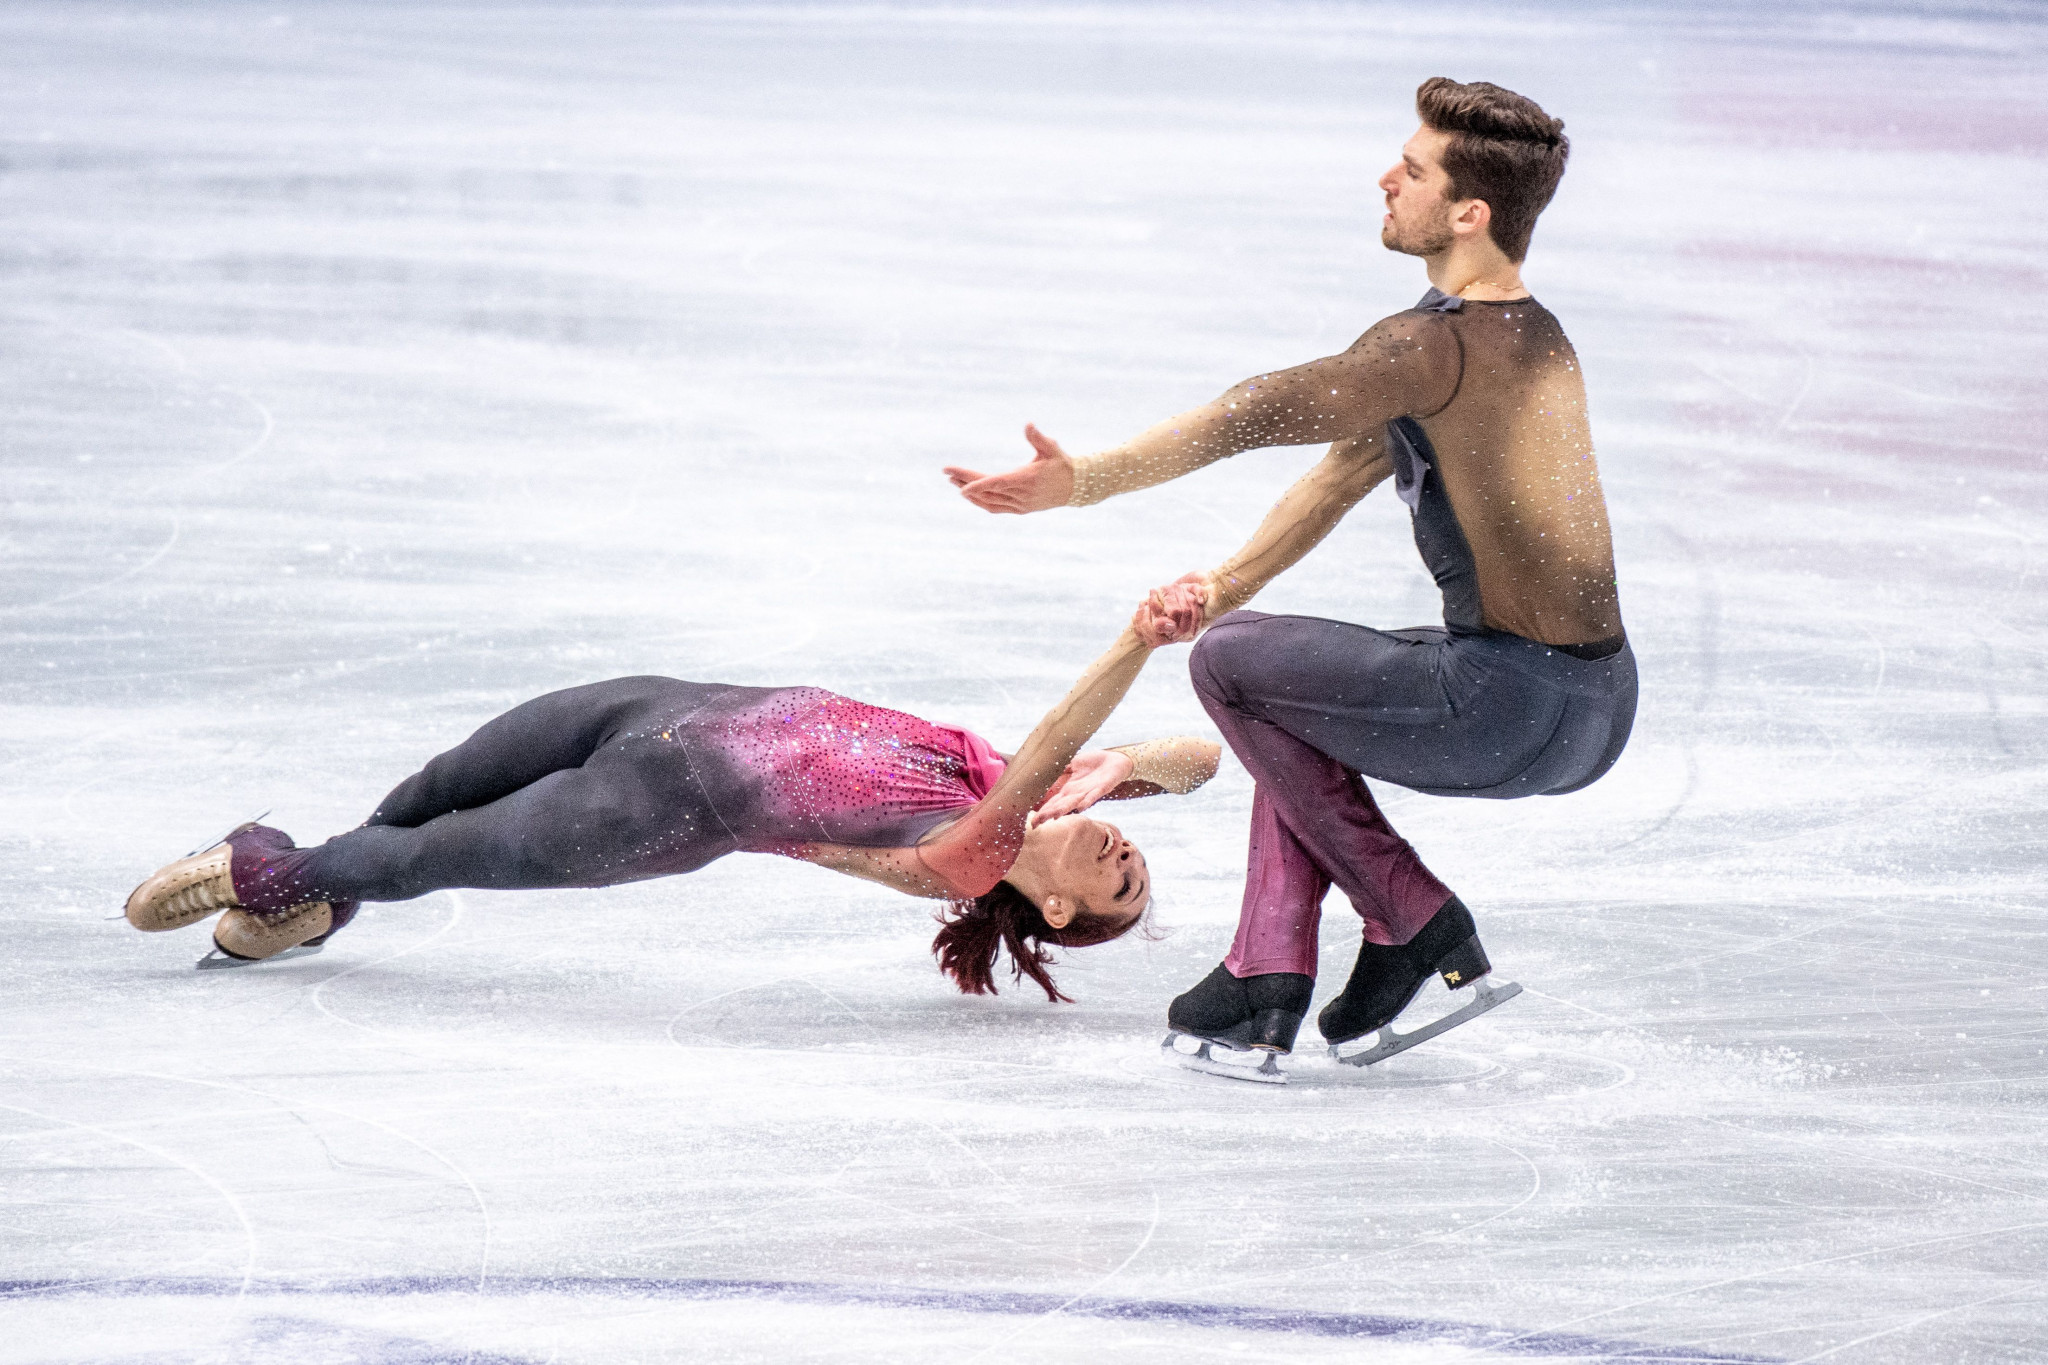 Turin has stepped in to host the third leg of the Grand Prix of Figure Skating season ©Getty Images